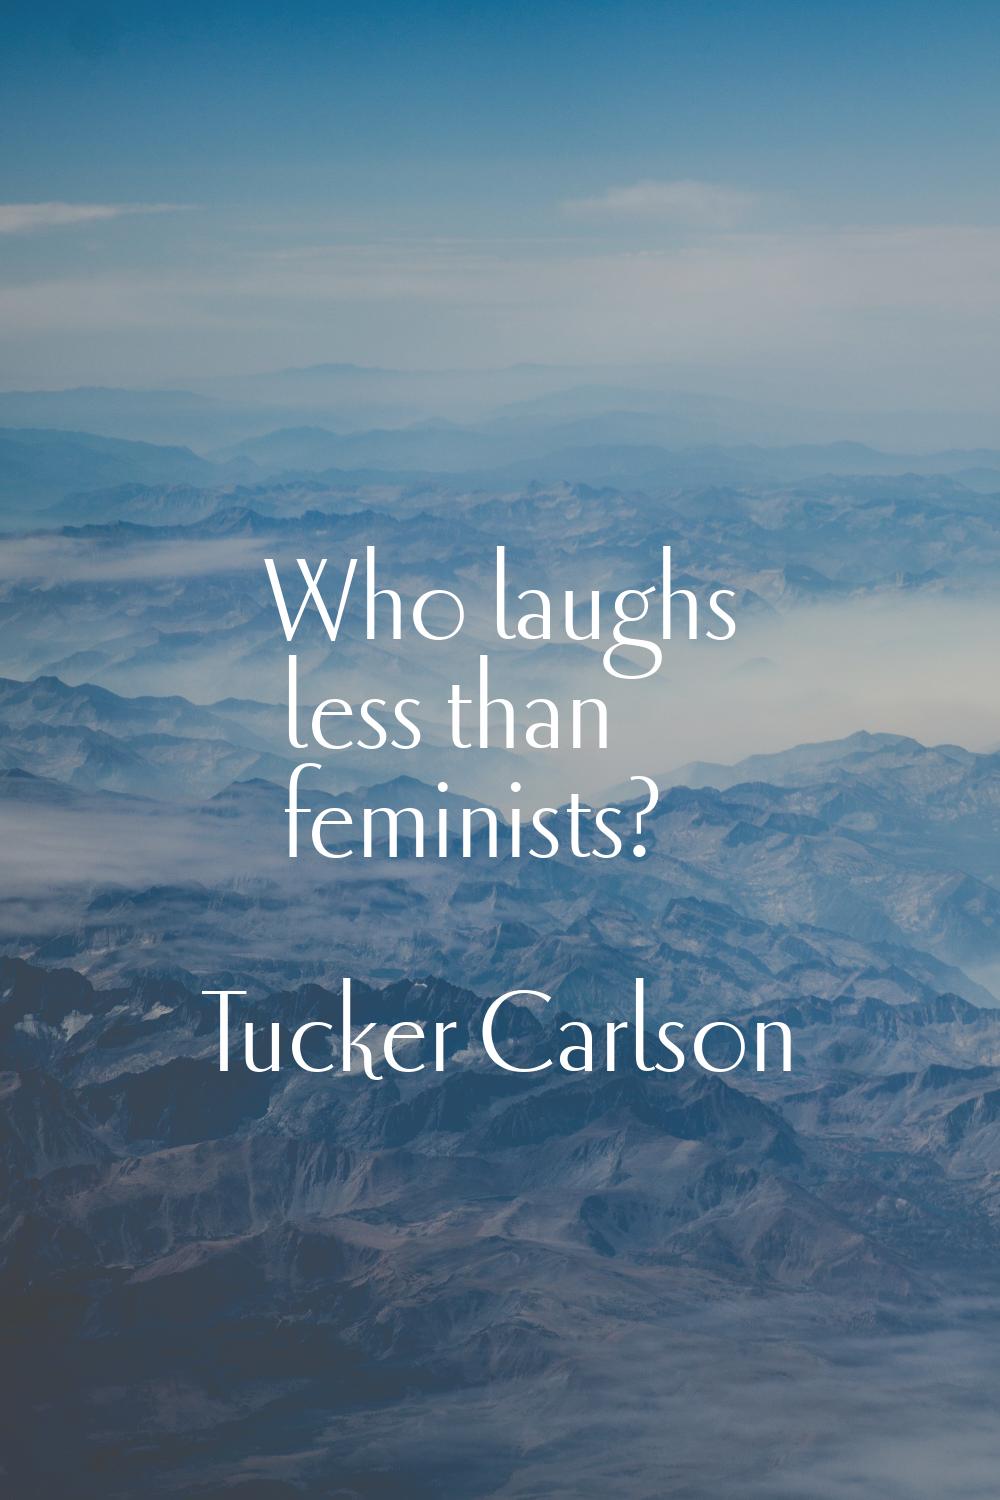 Who laughs less than feminists?